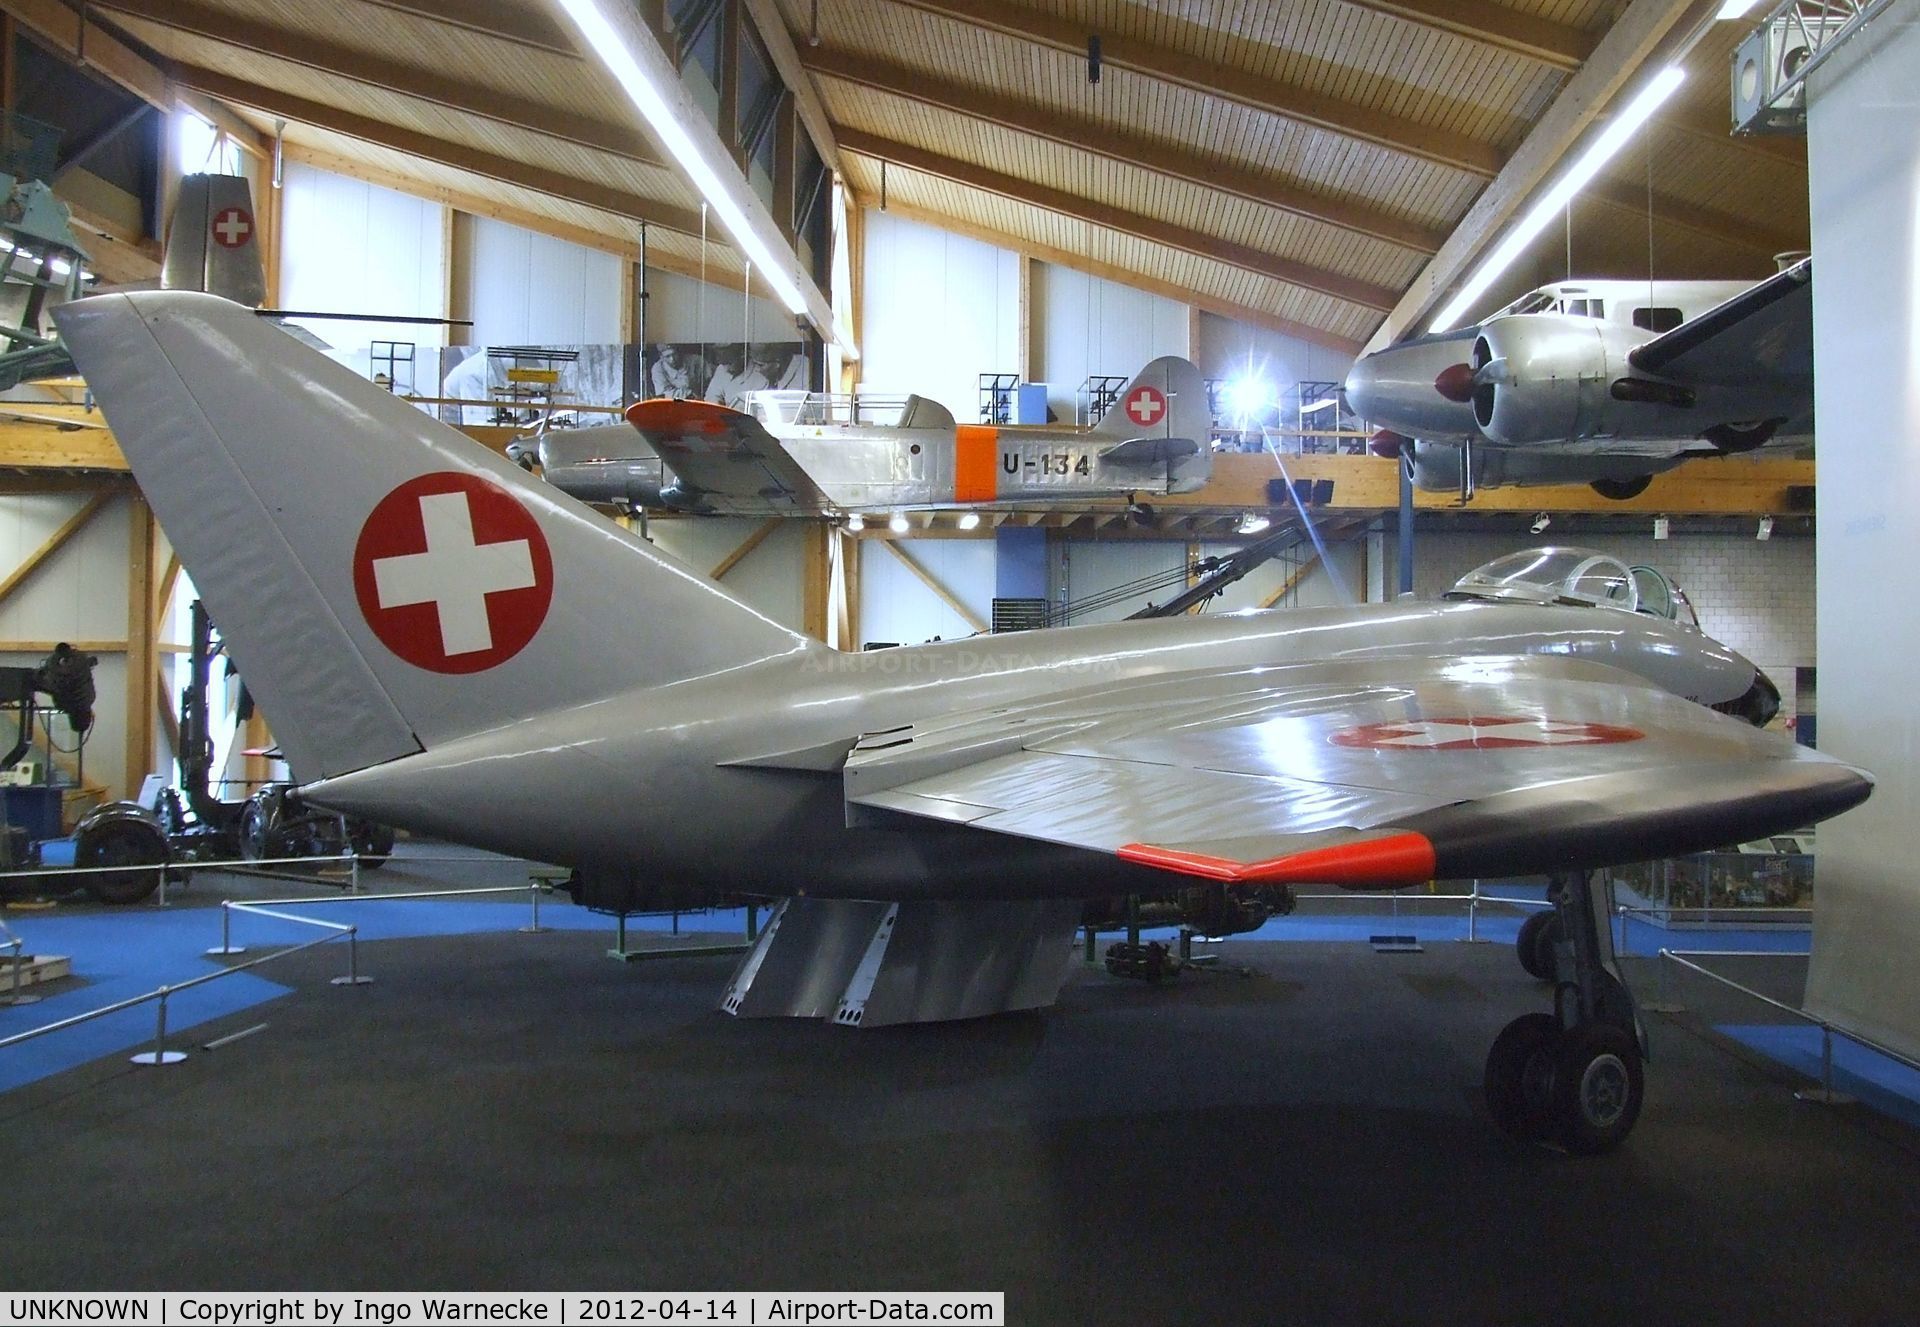 UNKNOWN, 1952 EFW N-20 Aiguillon C/N 001, EFW N-20 Aiguillon at the Flieger-Flab-Museum, Dübendorf